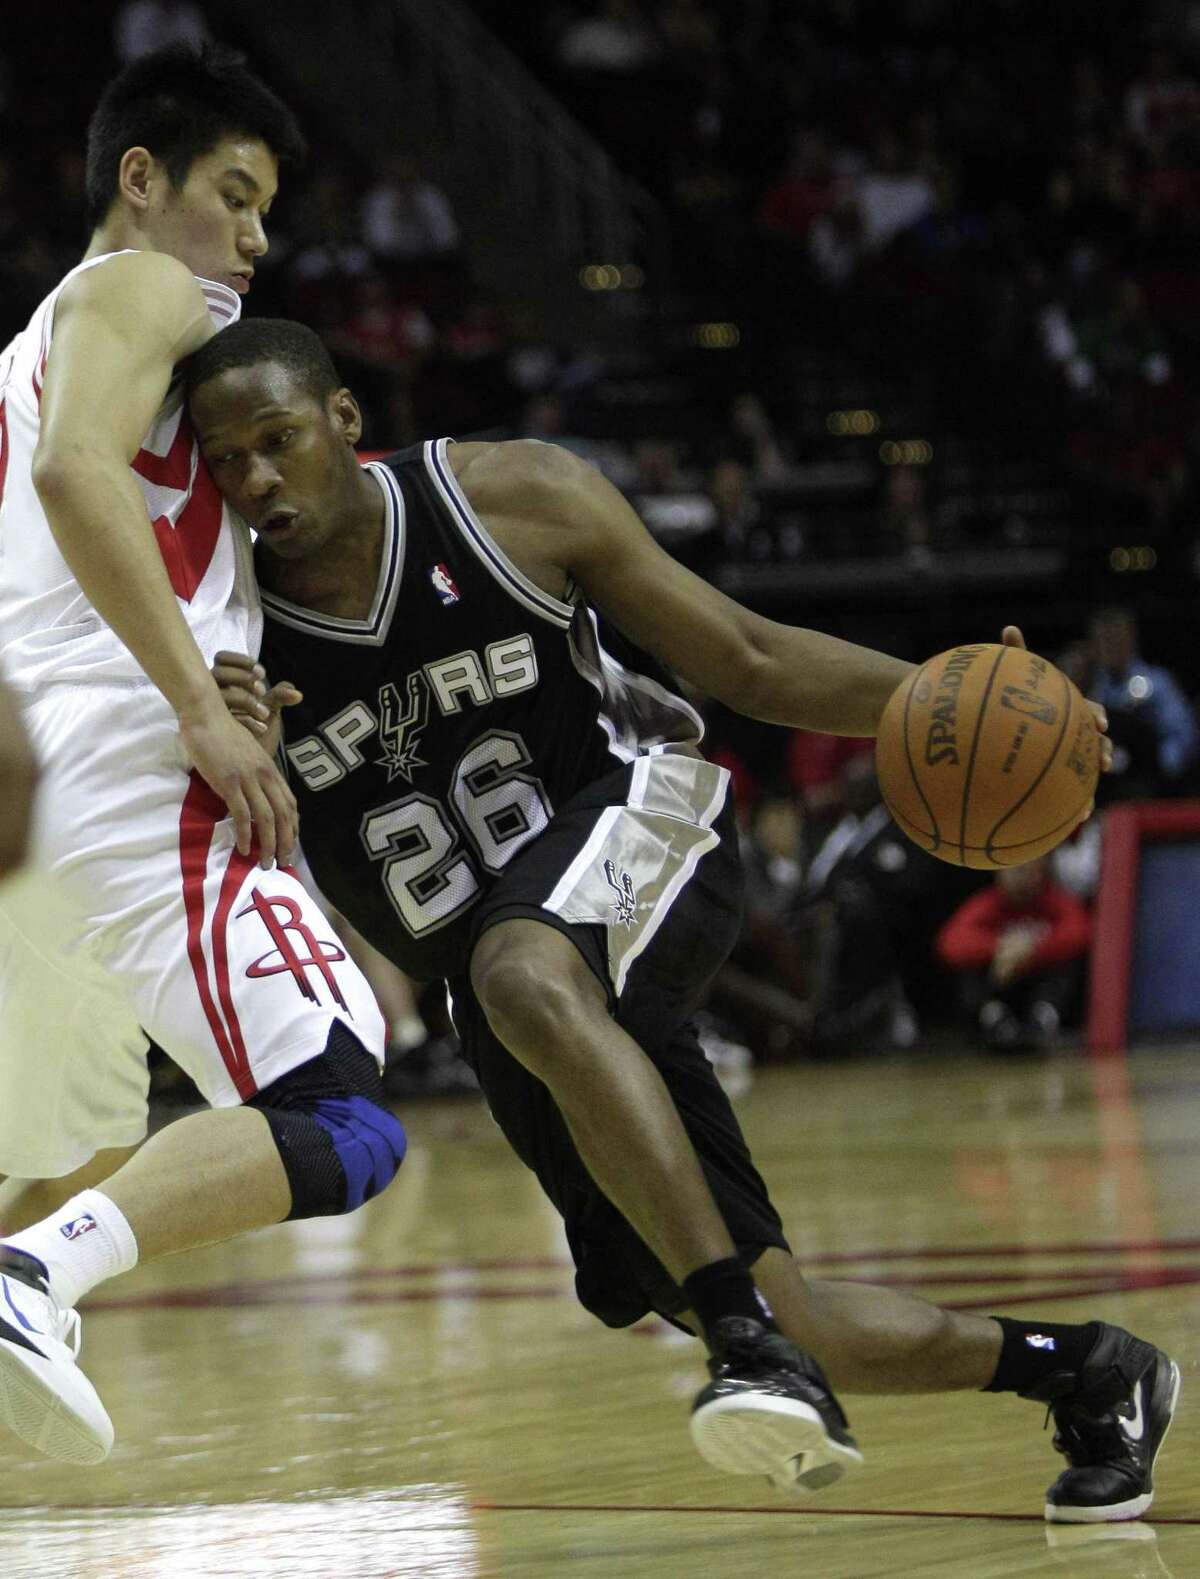 Spurs guard Antoine Hood drives with the ball against the Rockets guard Jeremy Lin during the second half of a preseason game at the Toyota Center on Dec. 17, 2011, in Houston.